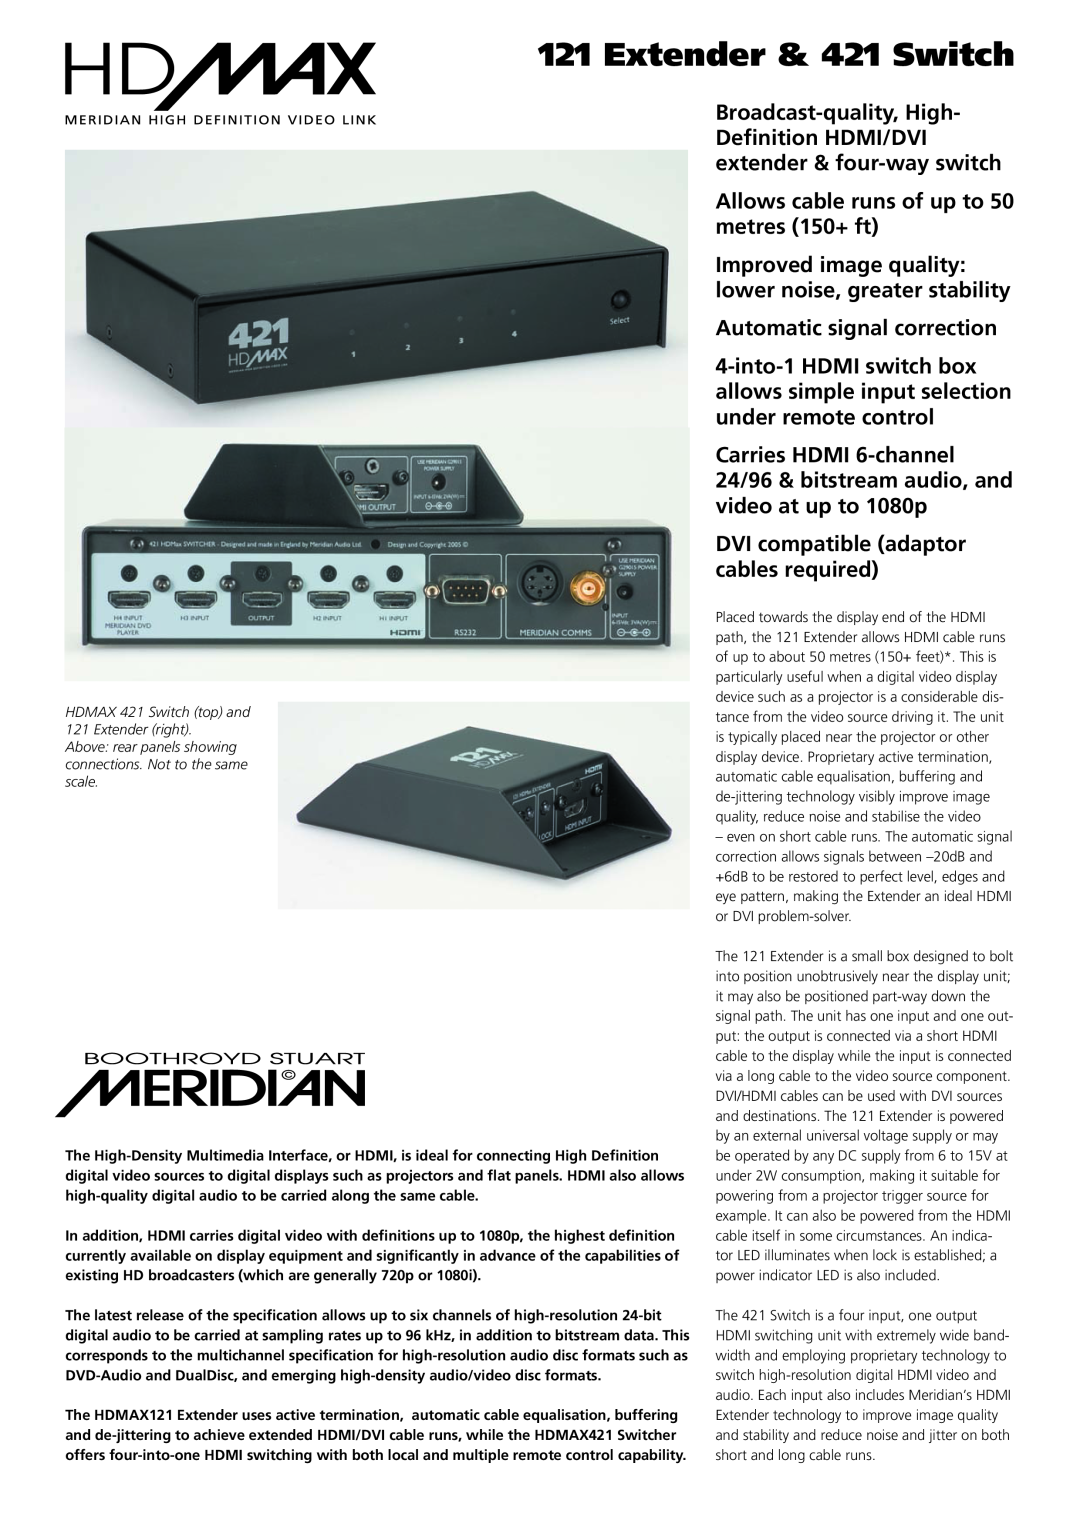 Meridian America manual Extender & 421 Switch, Allows cable runs of up to 50 metres 150+ ft 